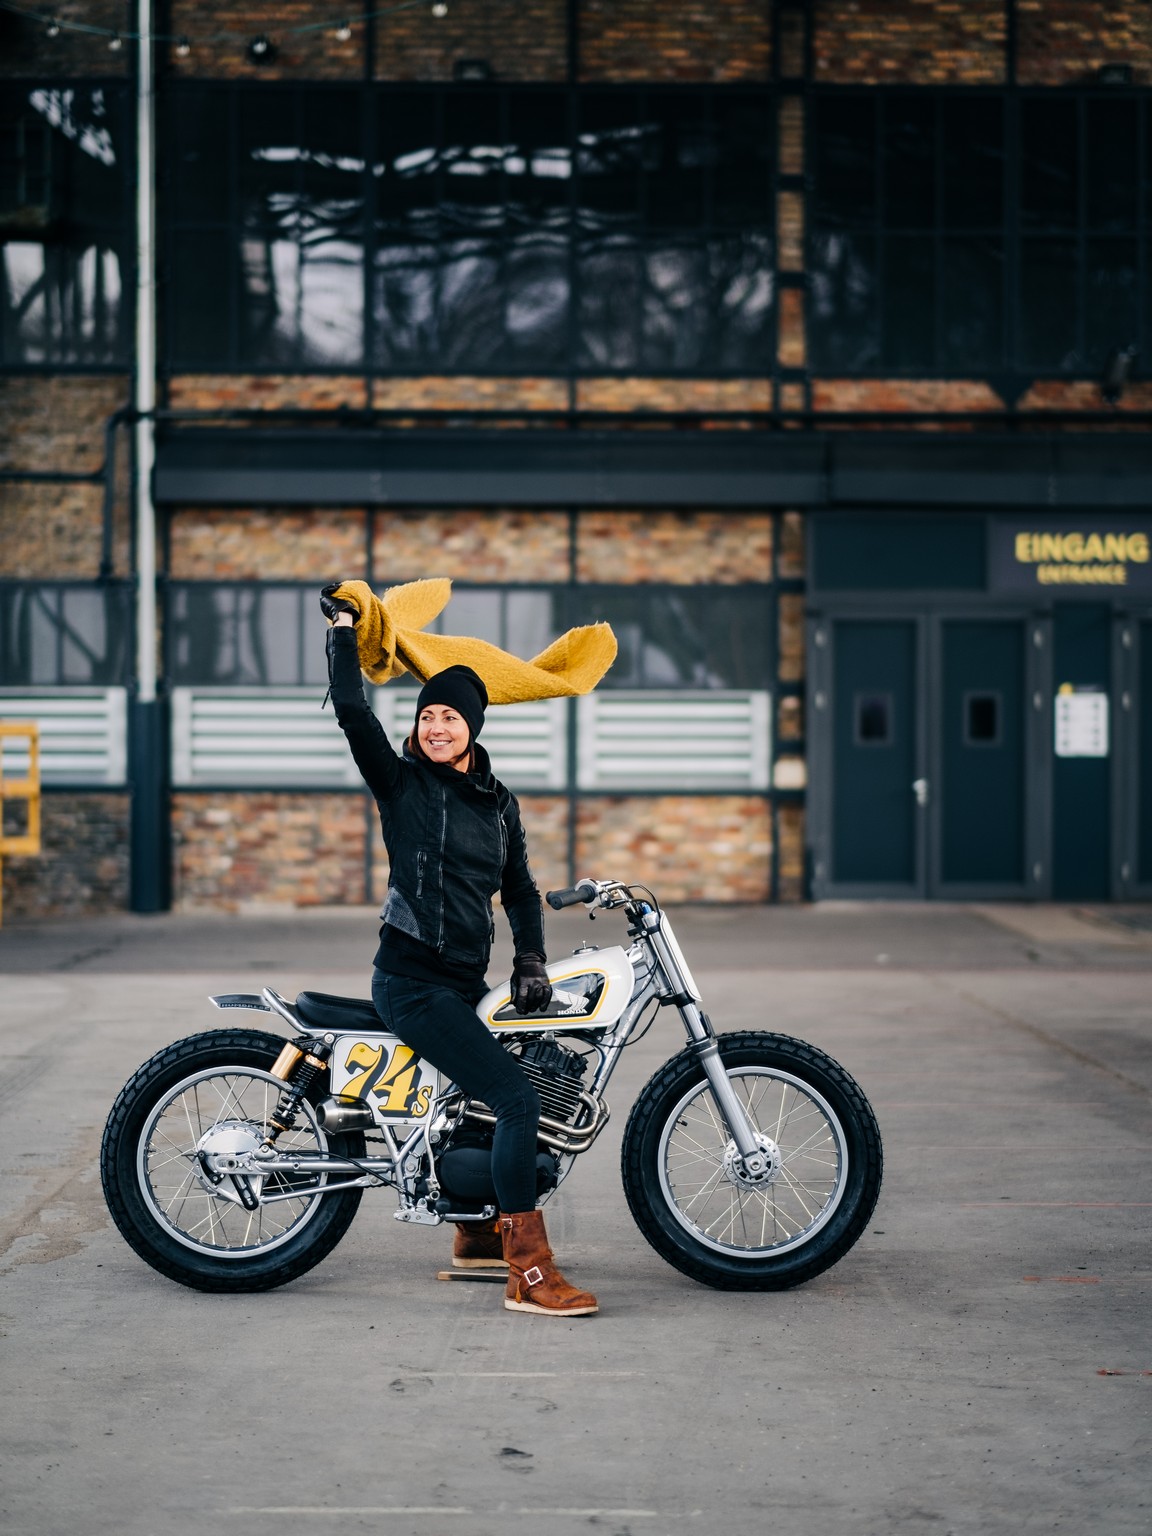 Woman on a Honda Flat Tracker motorcycle waving a yellow scarf and smiling